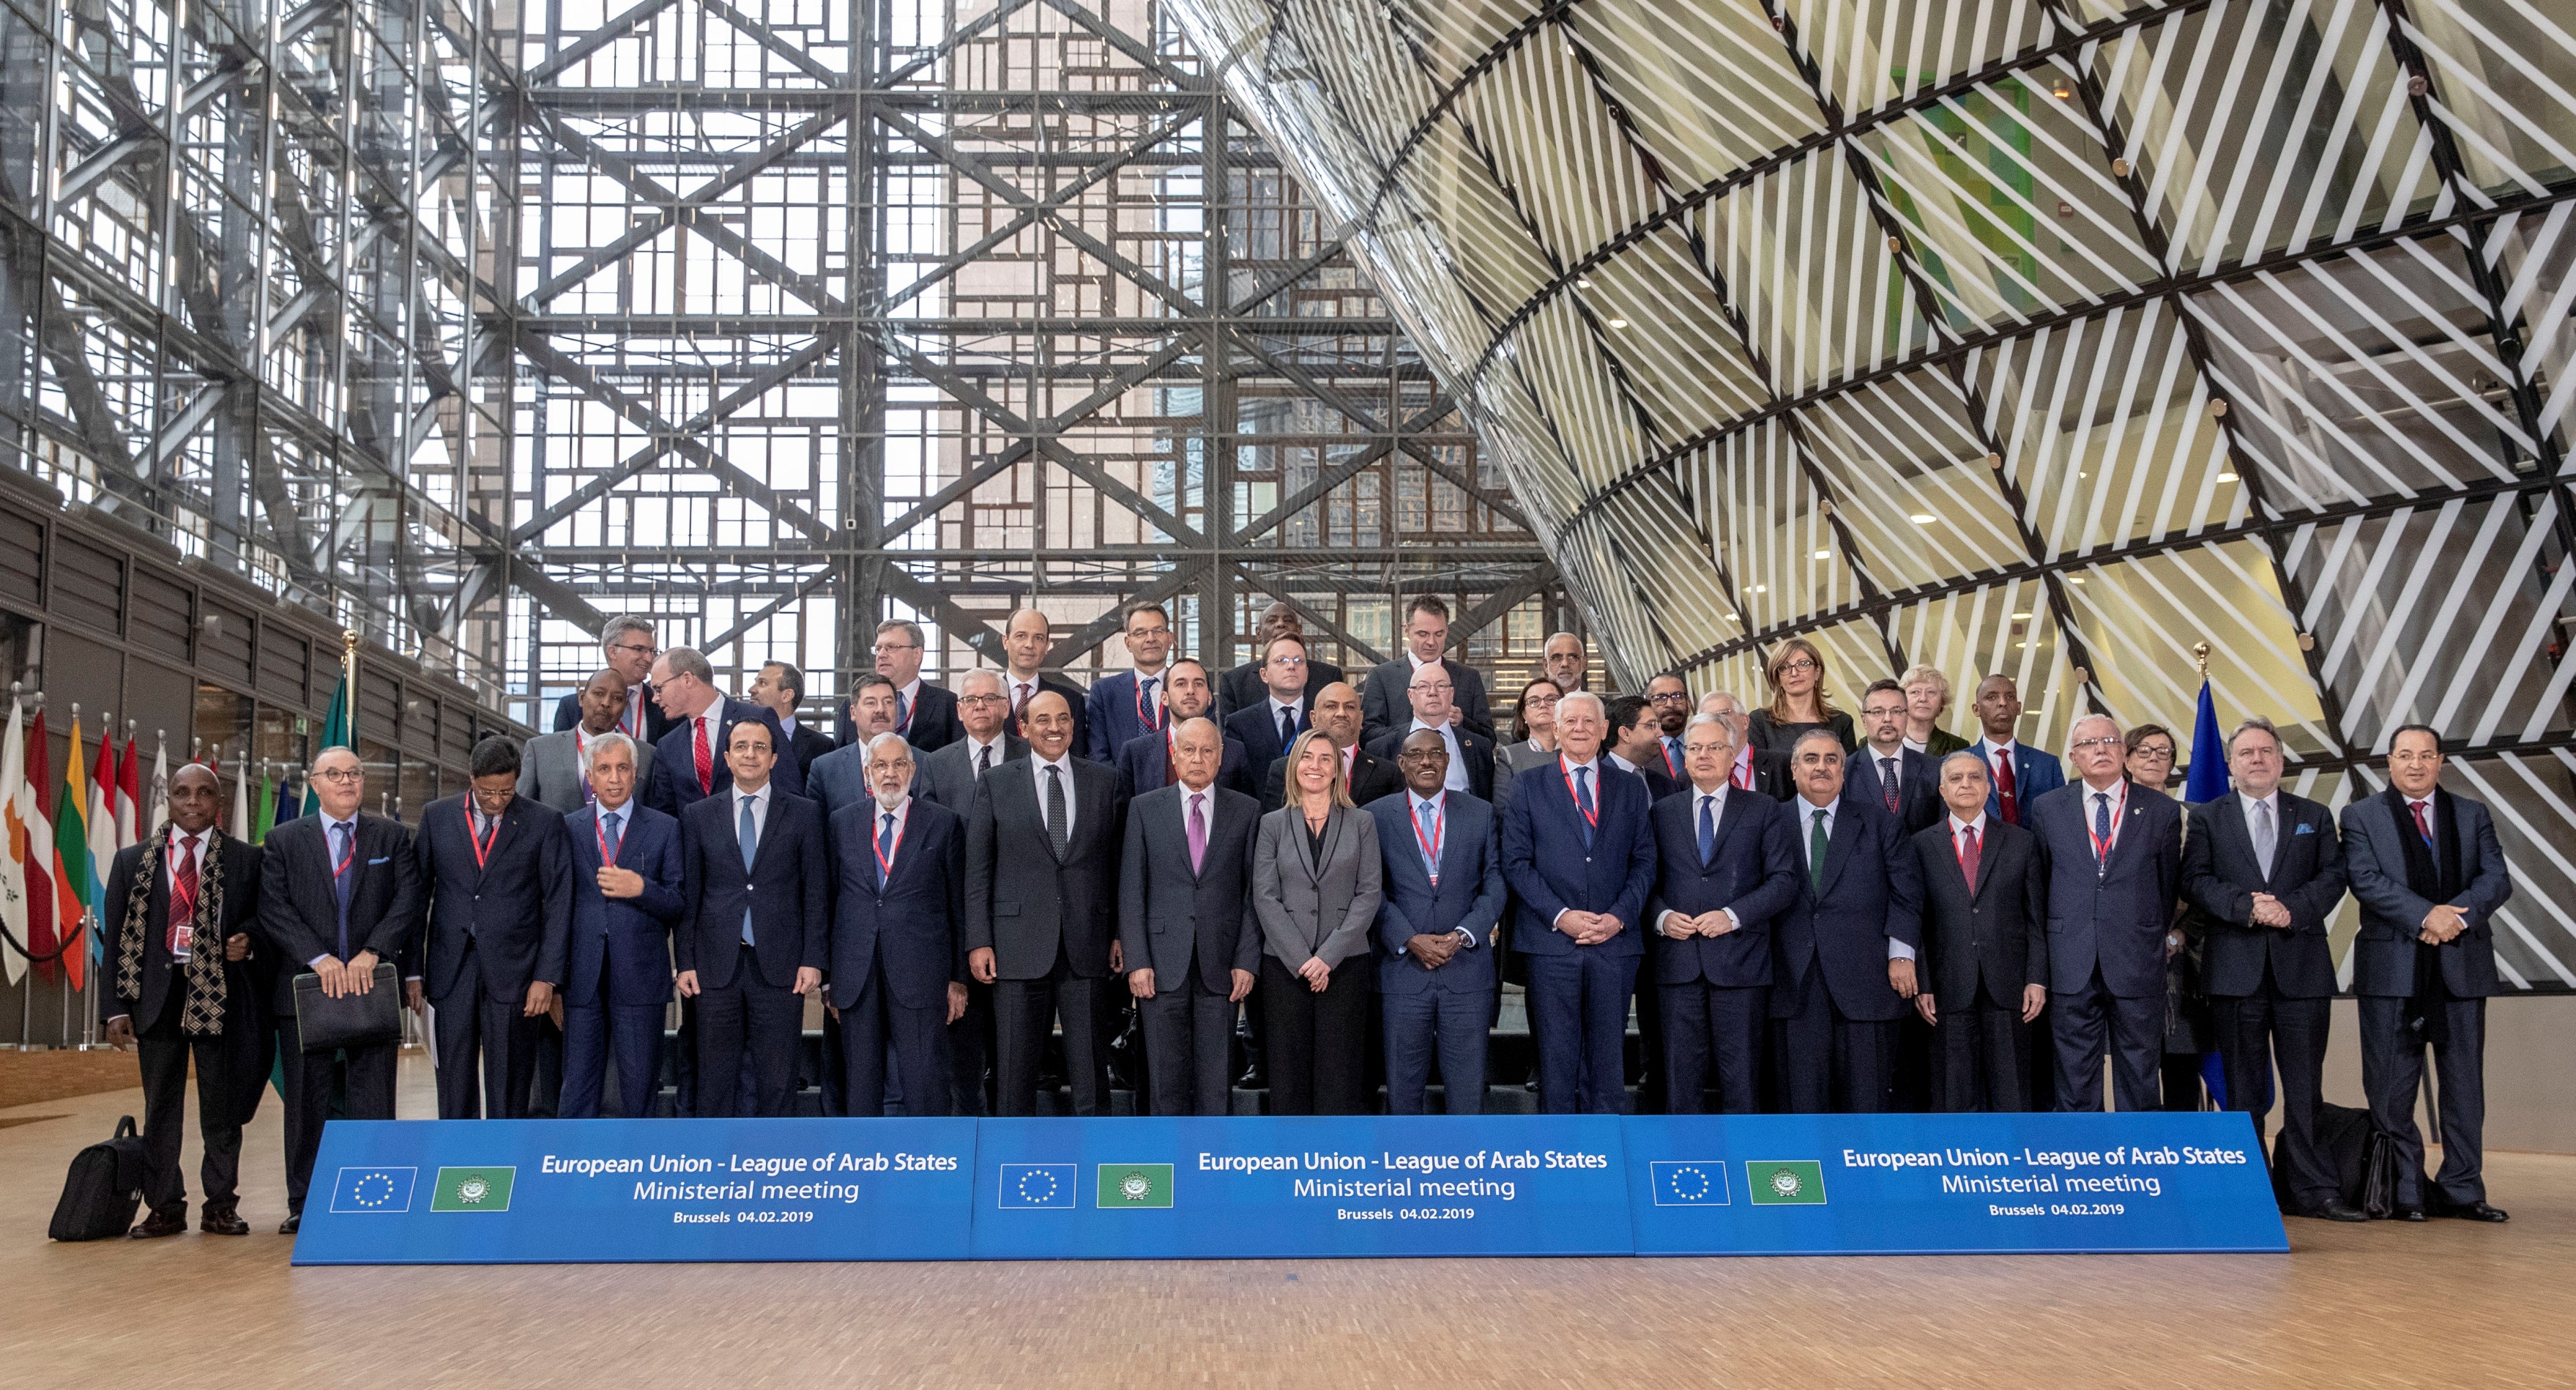 EU-League of Arab States Ministerial Meeting in Brussels